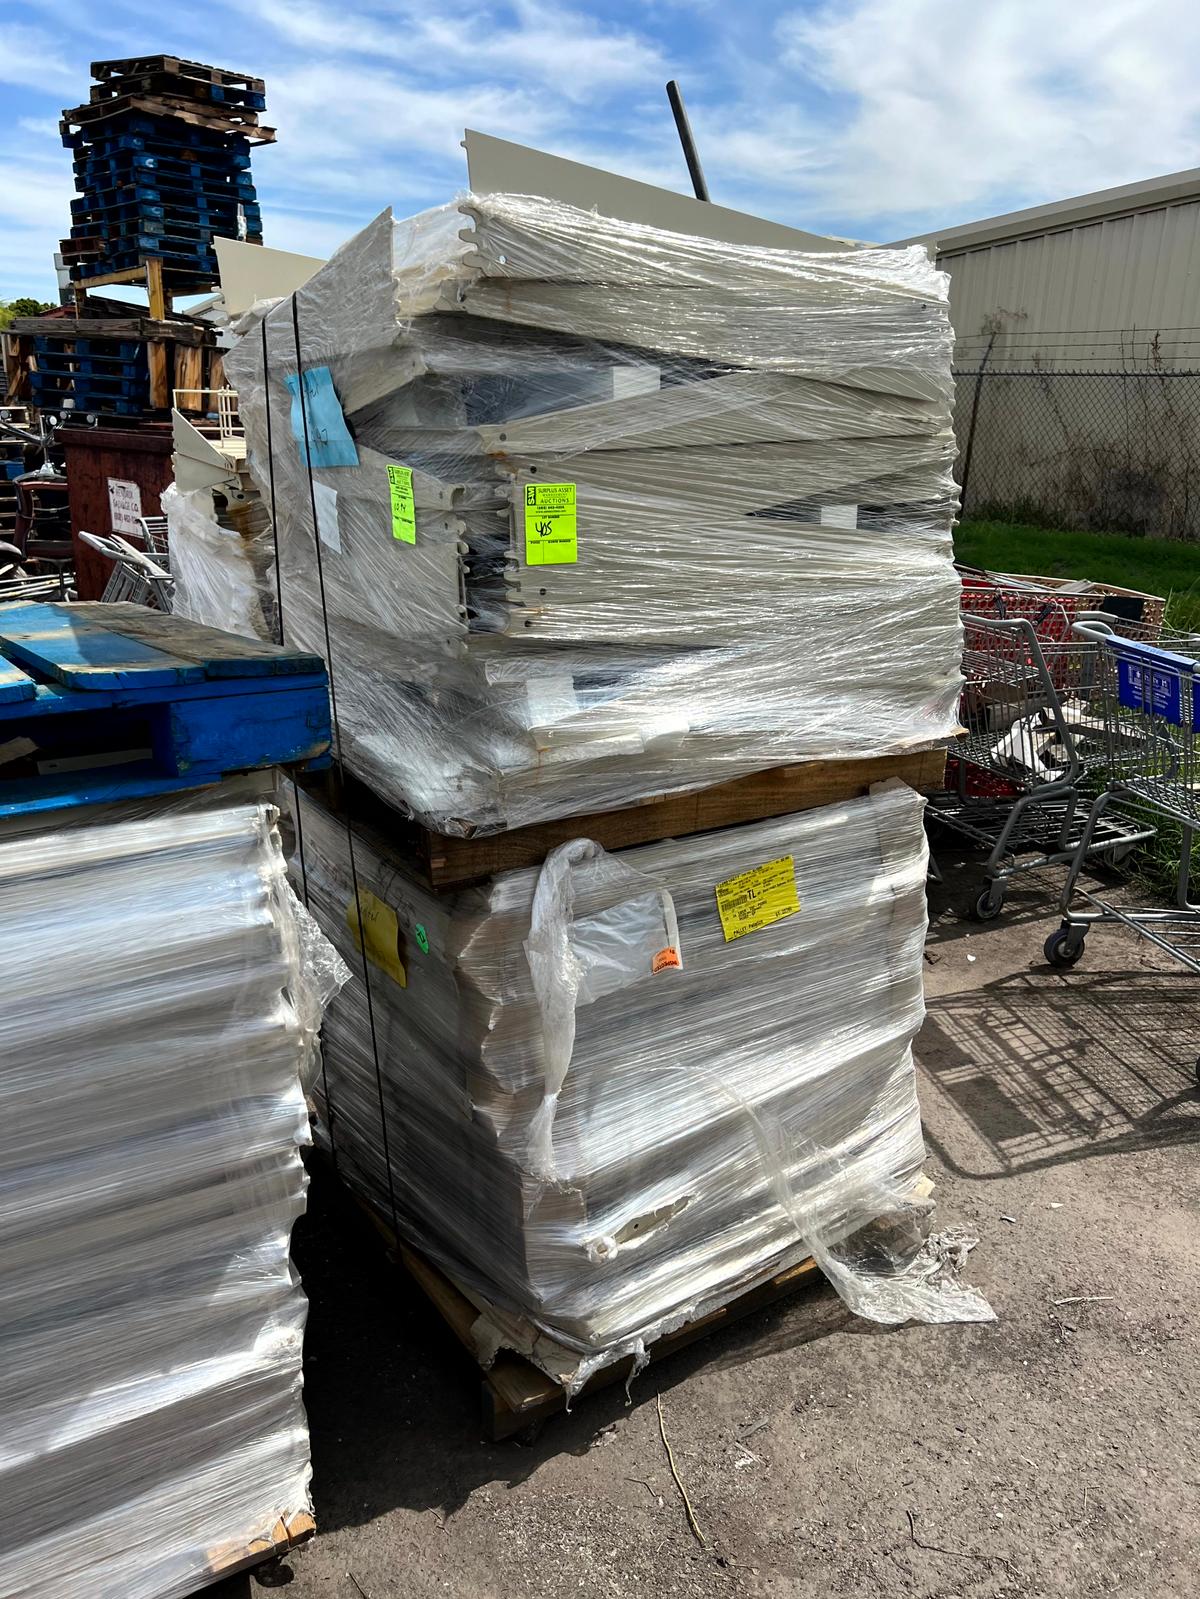 Pallet of Assorted Shelving